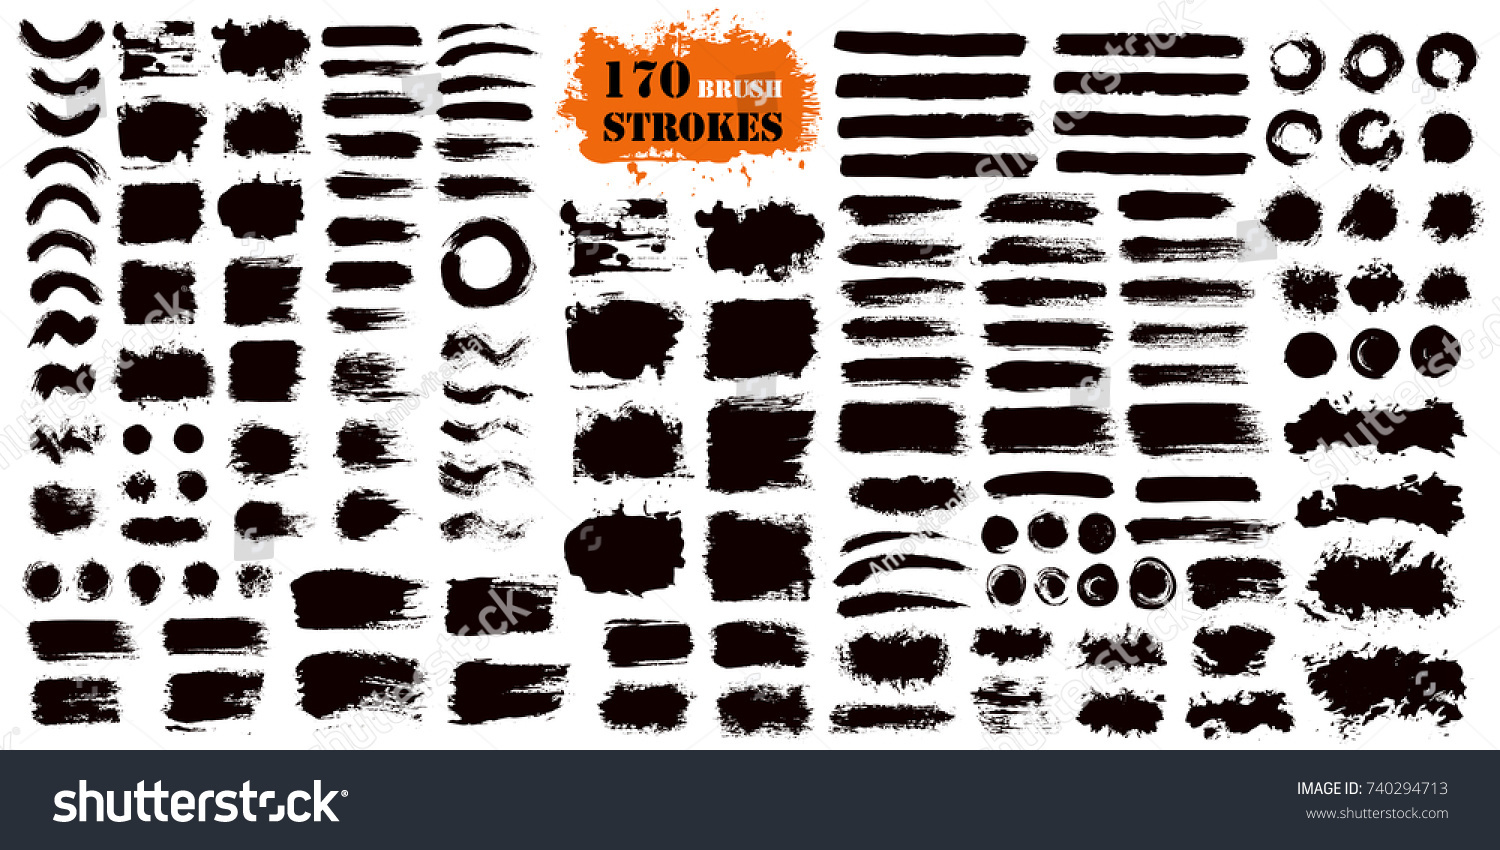 Brush strokes text boxes. Vector paintbrush set. Grunge design elements. Dirty texture banners. Ink splatters. Painted objects. #740294713